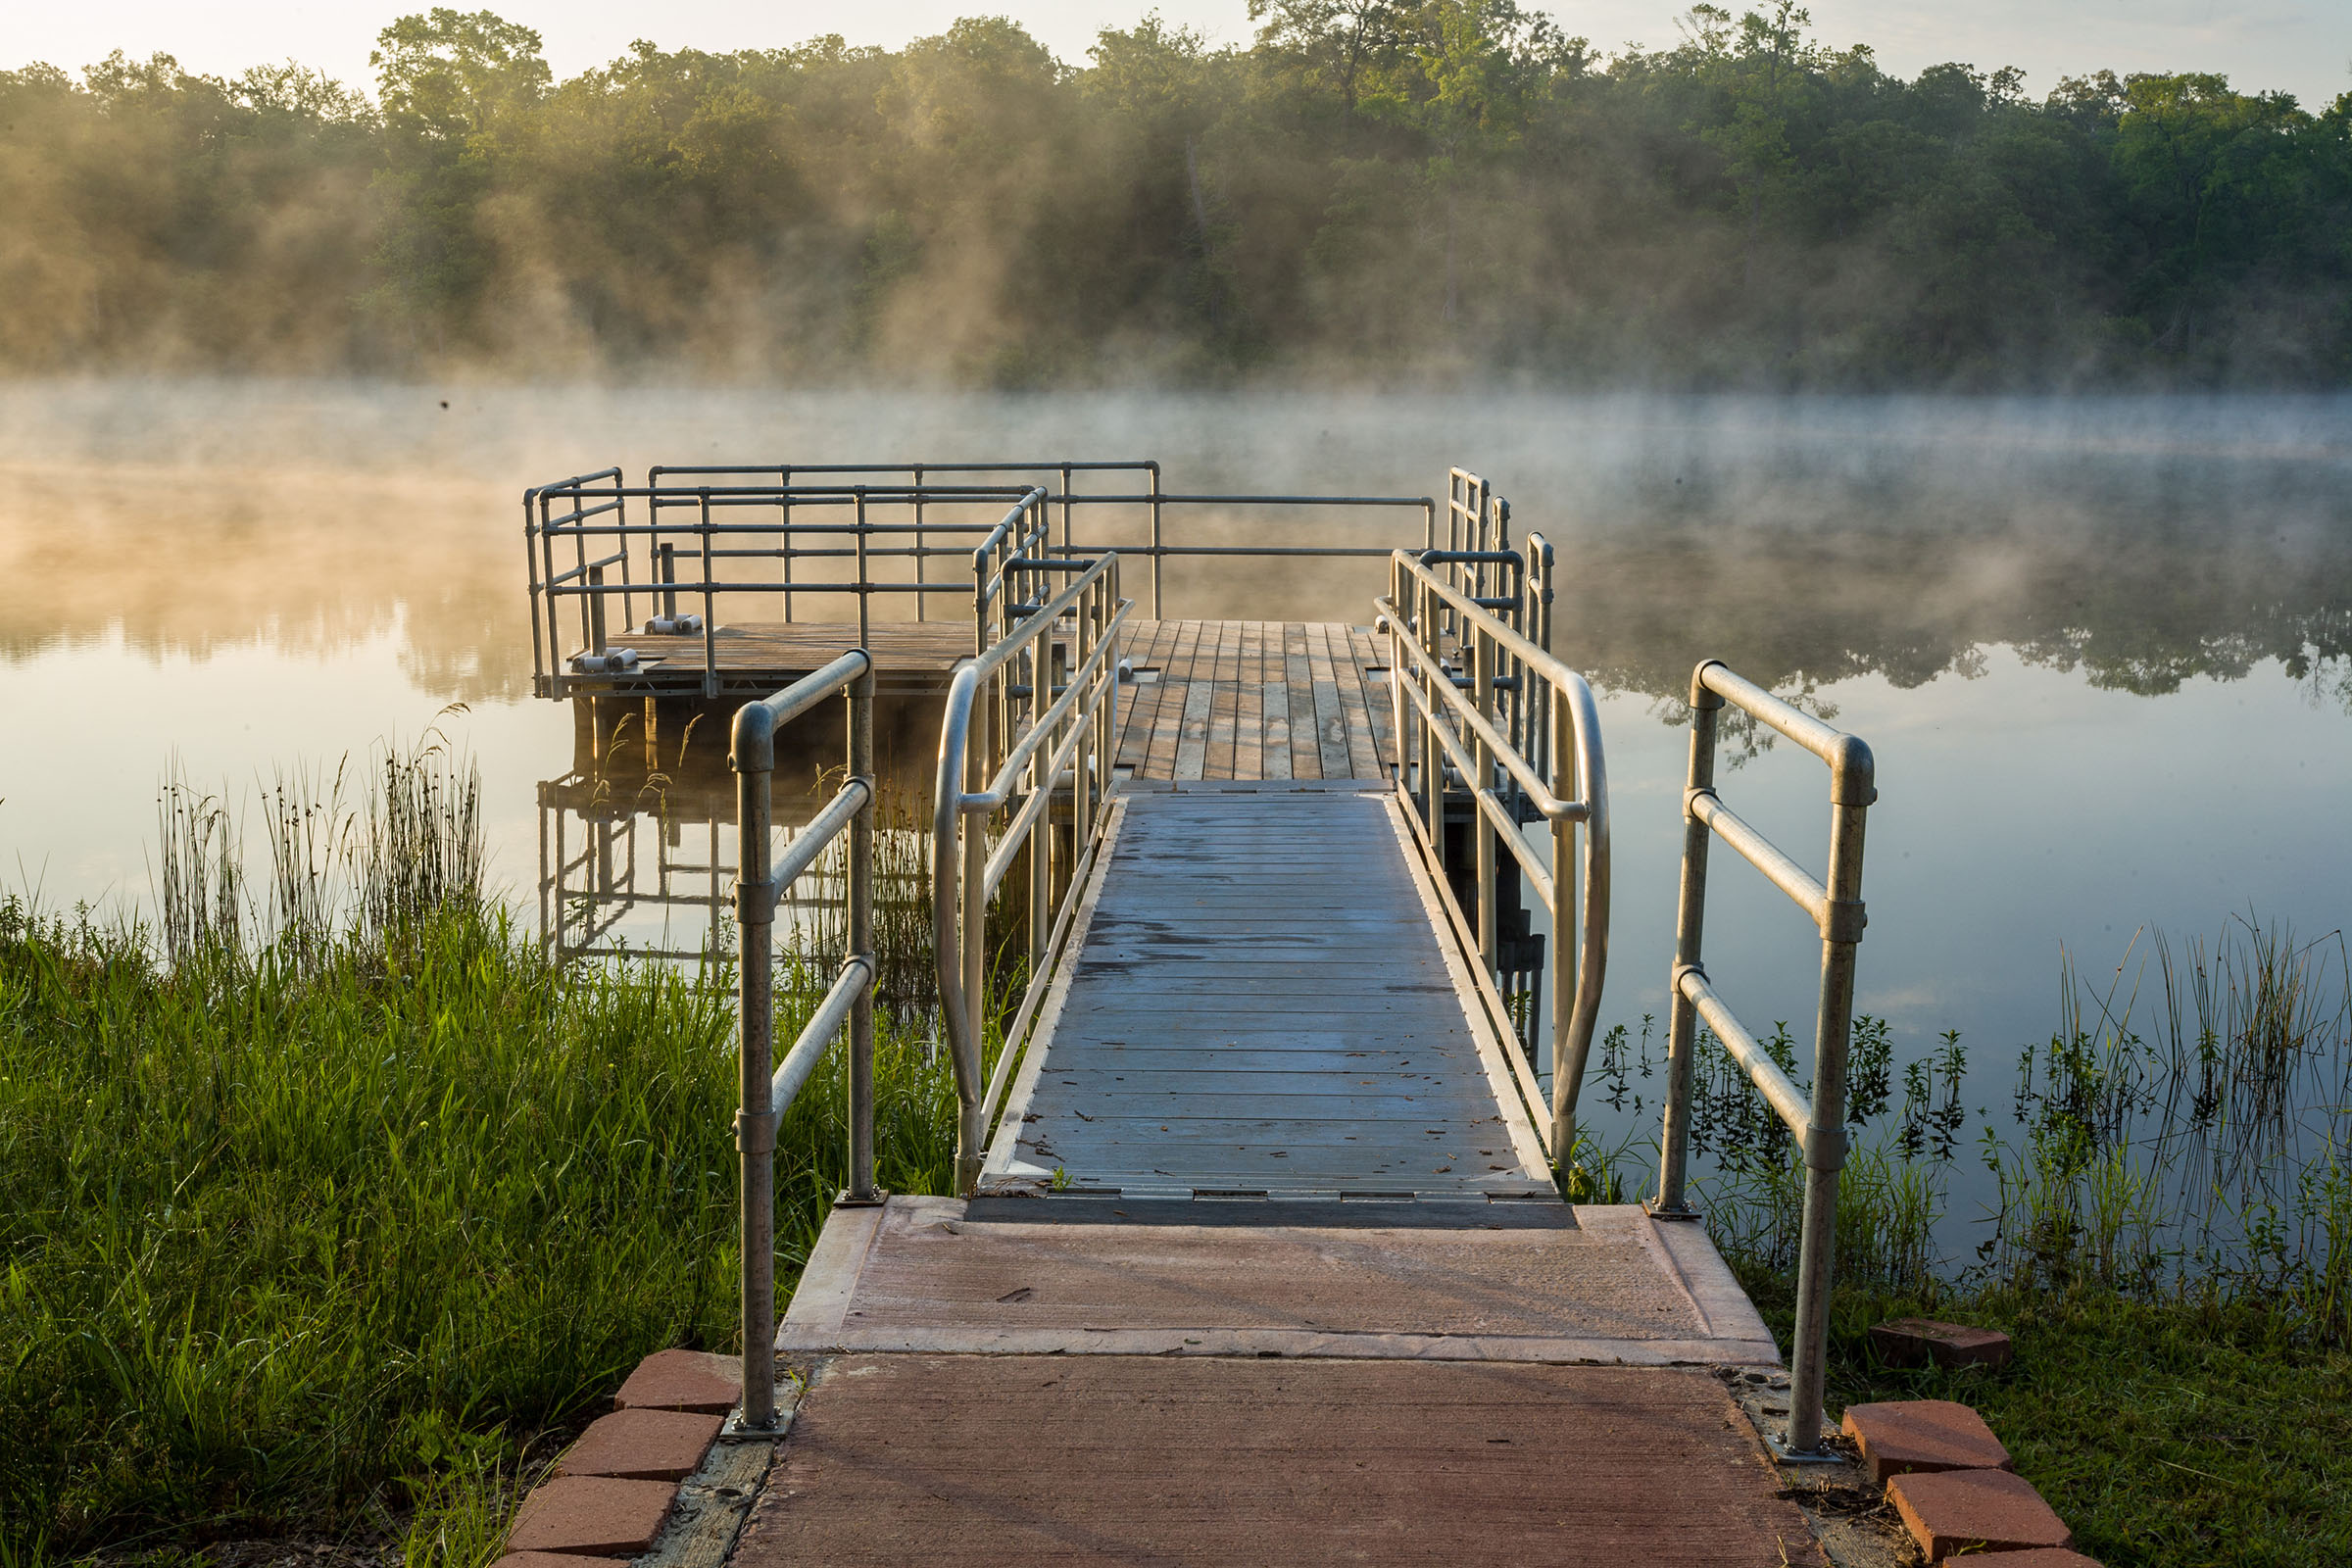 Steam rises off of a smooth body of water around a fishing pier